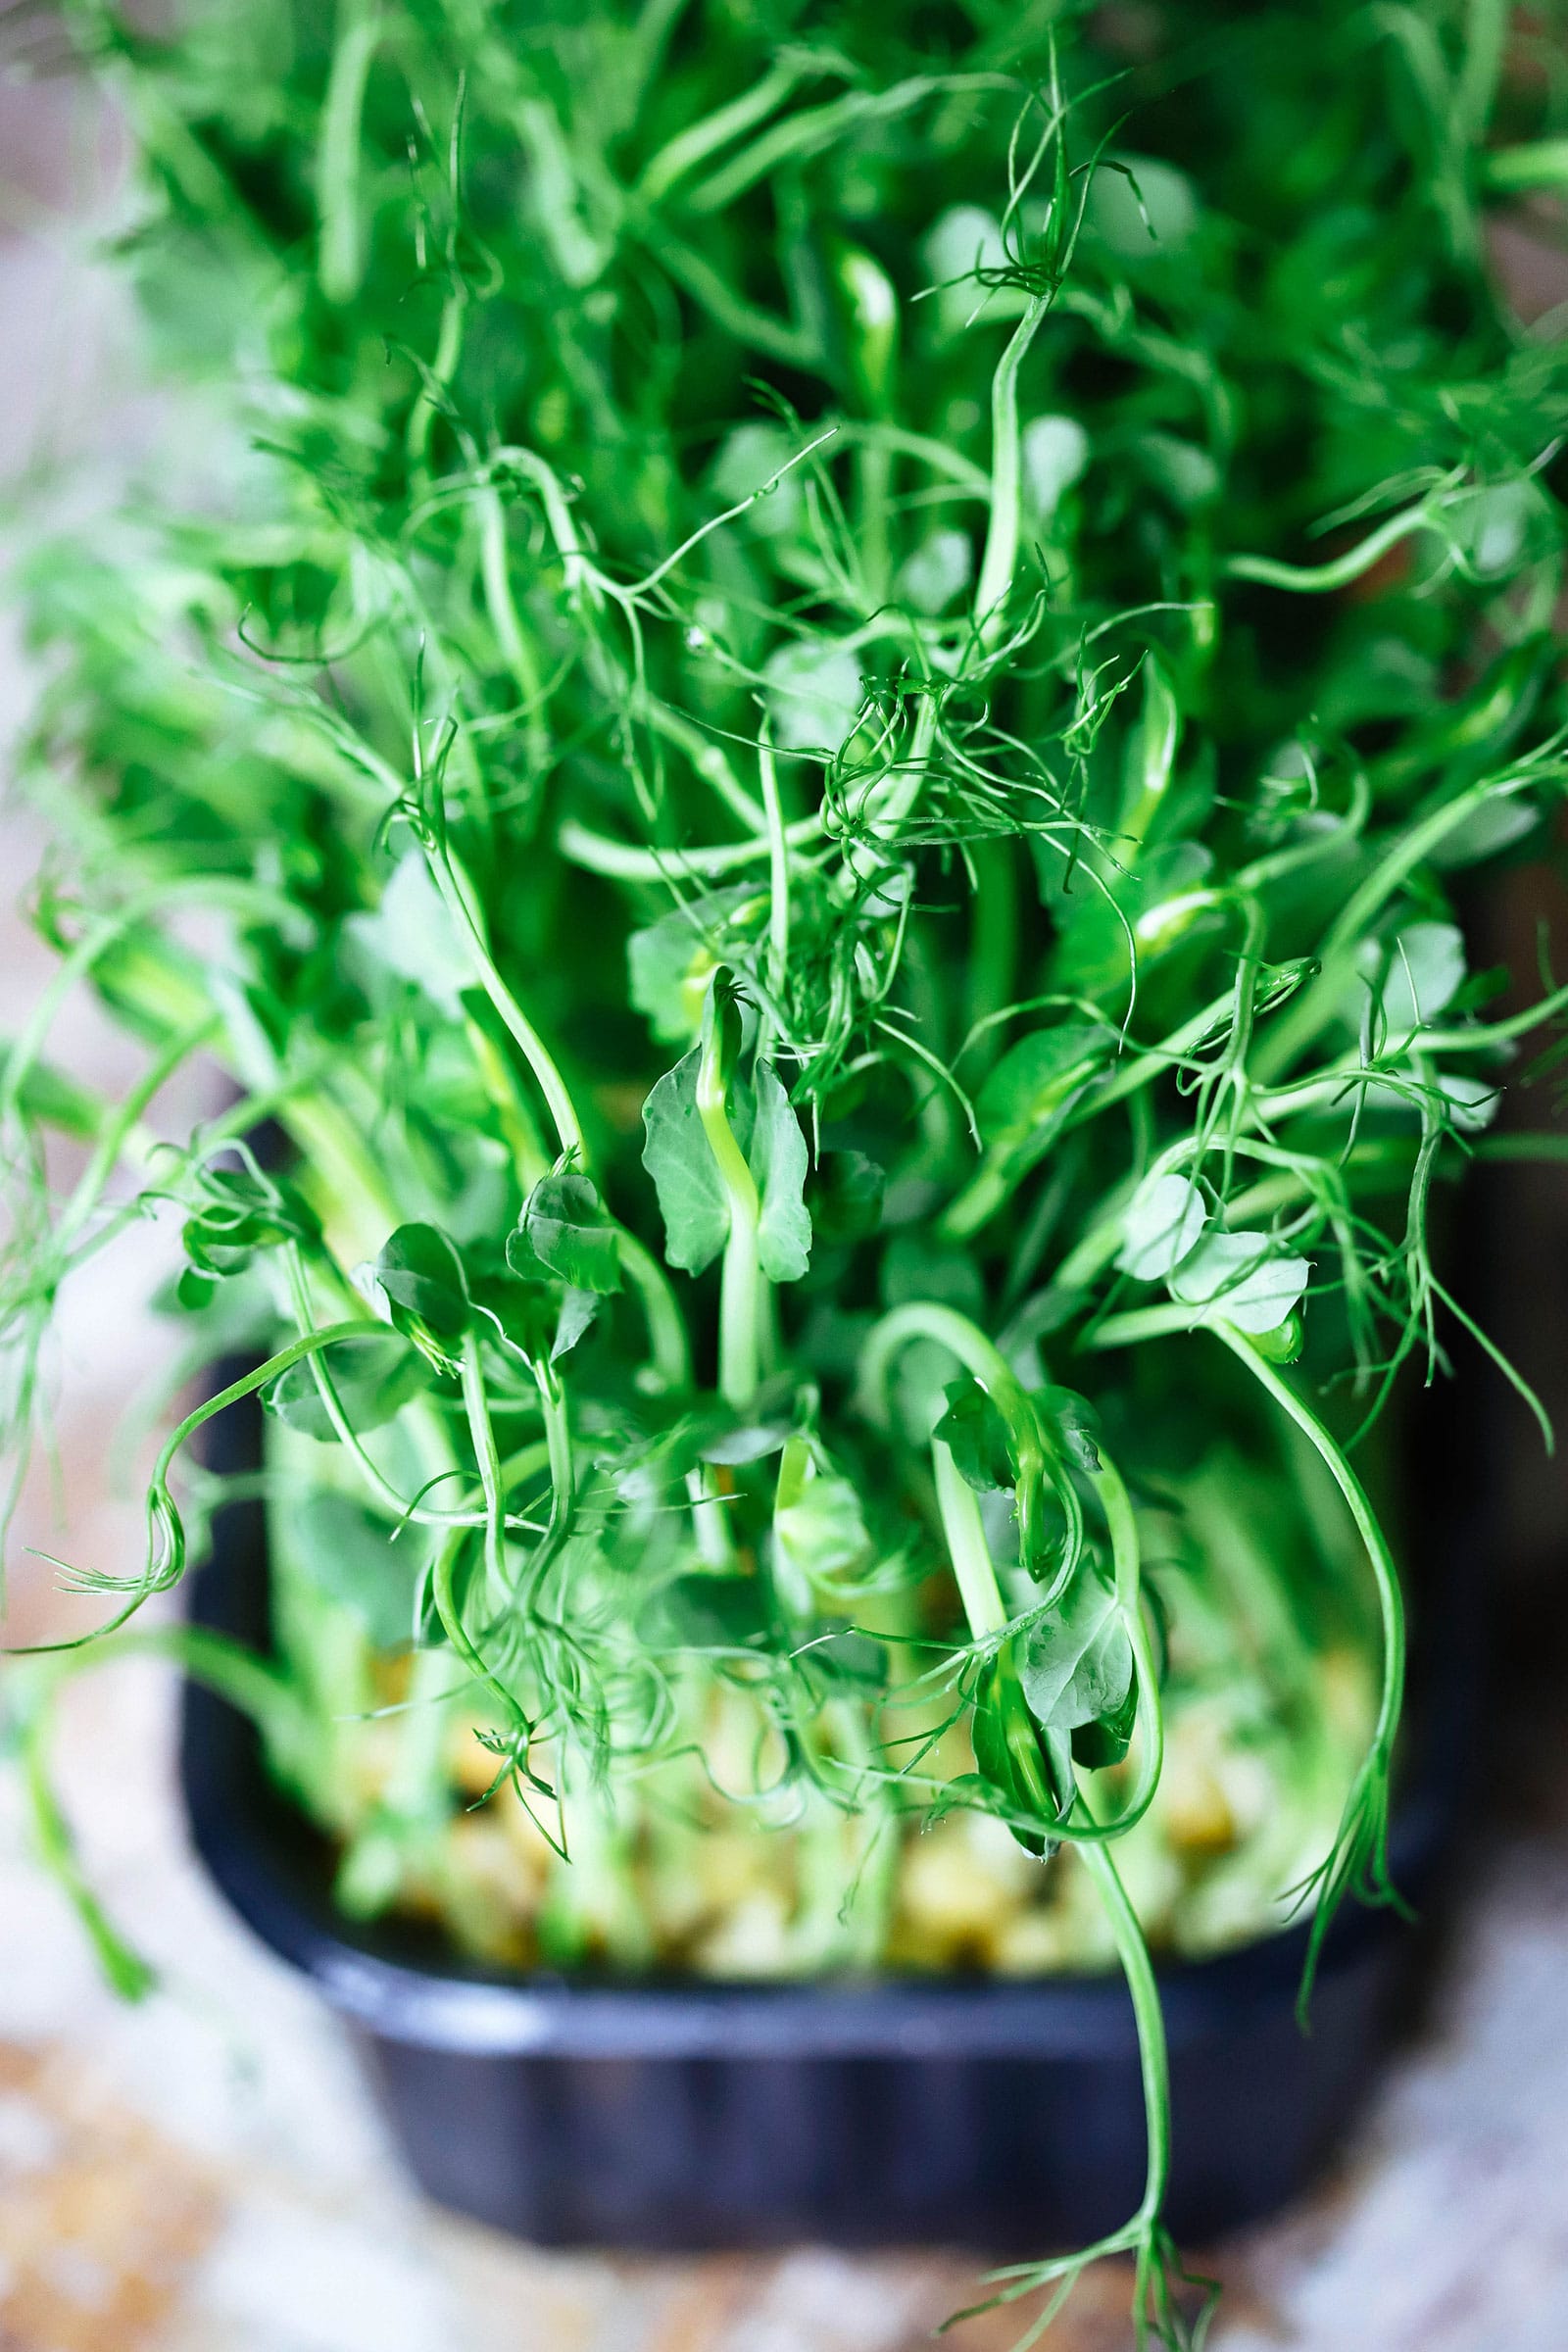 Pea shoots growing in a tray indoors